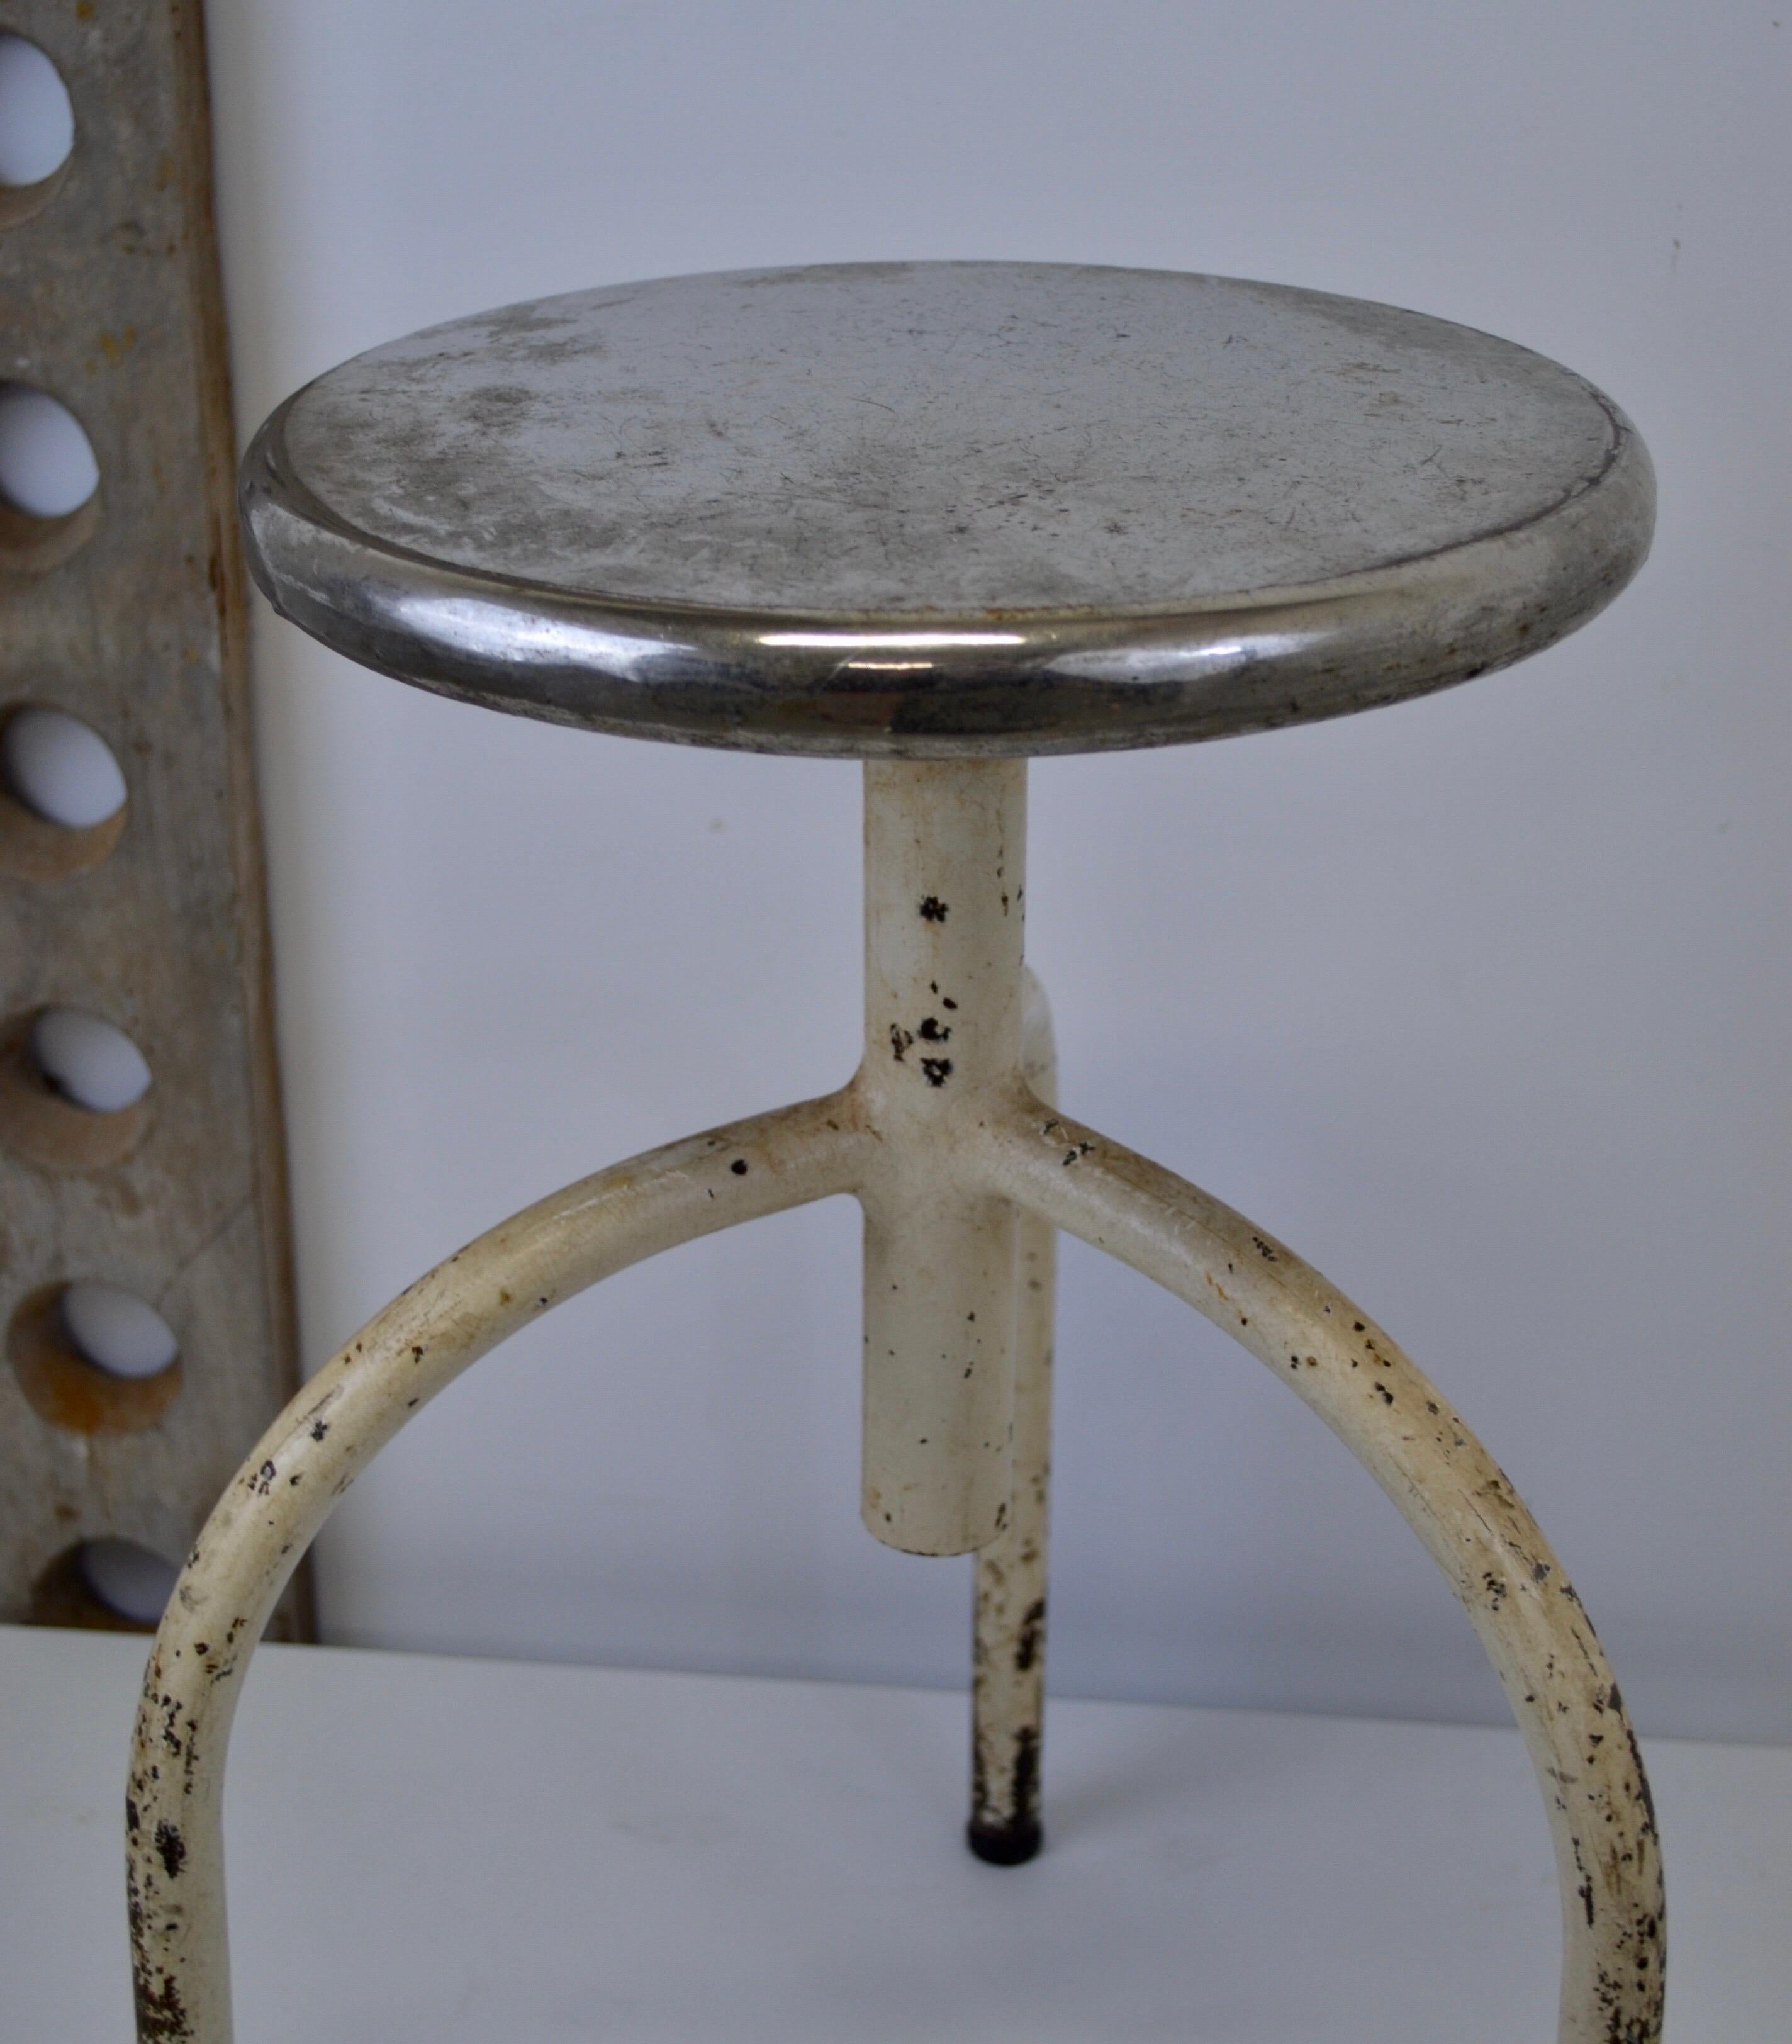 A Hospital dispensary stool c. 1930. Curved steel and sheet metal, adjustment by endless screw. 
Very stable and solid. 
Superb period patina.
Dimensions: H45/70 D30 [cm]